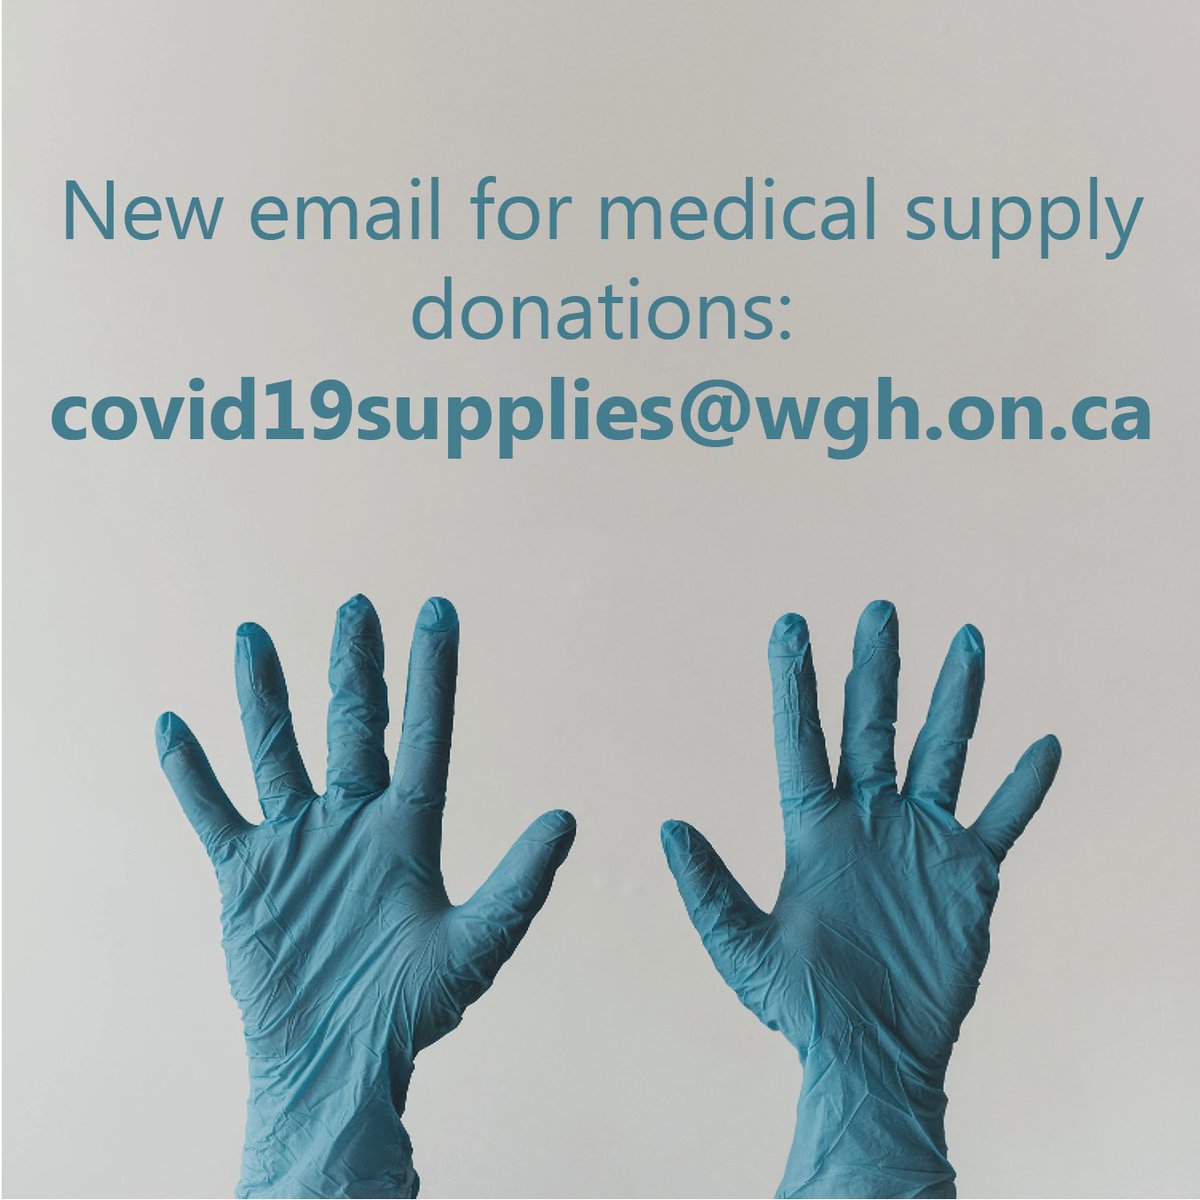 Thank you to our generous community for donating extra medical supplies to Woodstock Hospital. We have created a new email to facilitate these donations. Please email covid19supplies@wgh.on.ca #InThisTogether #FriendlyCity